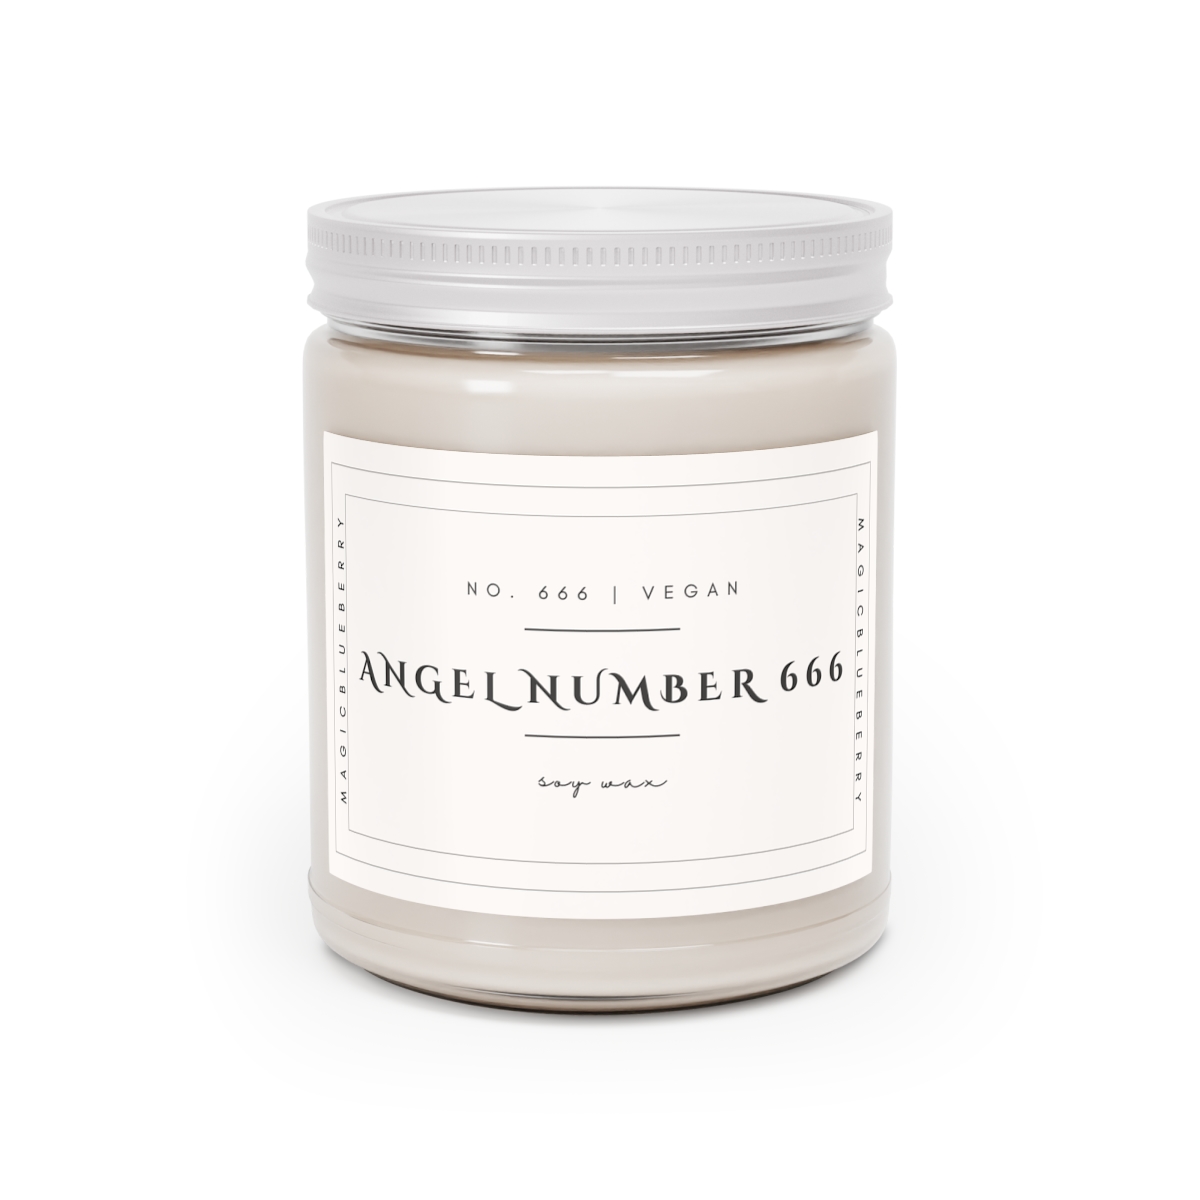 Angel number666 Scented Vegan Soy Wax Candle Clear Jar Candle, Spell Candle, Sassy Candle Vegan Candle Cotton Wick Candle Home Decor Candle product thumbnail image